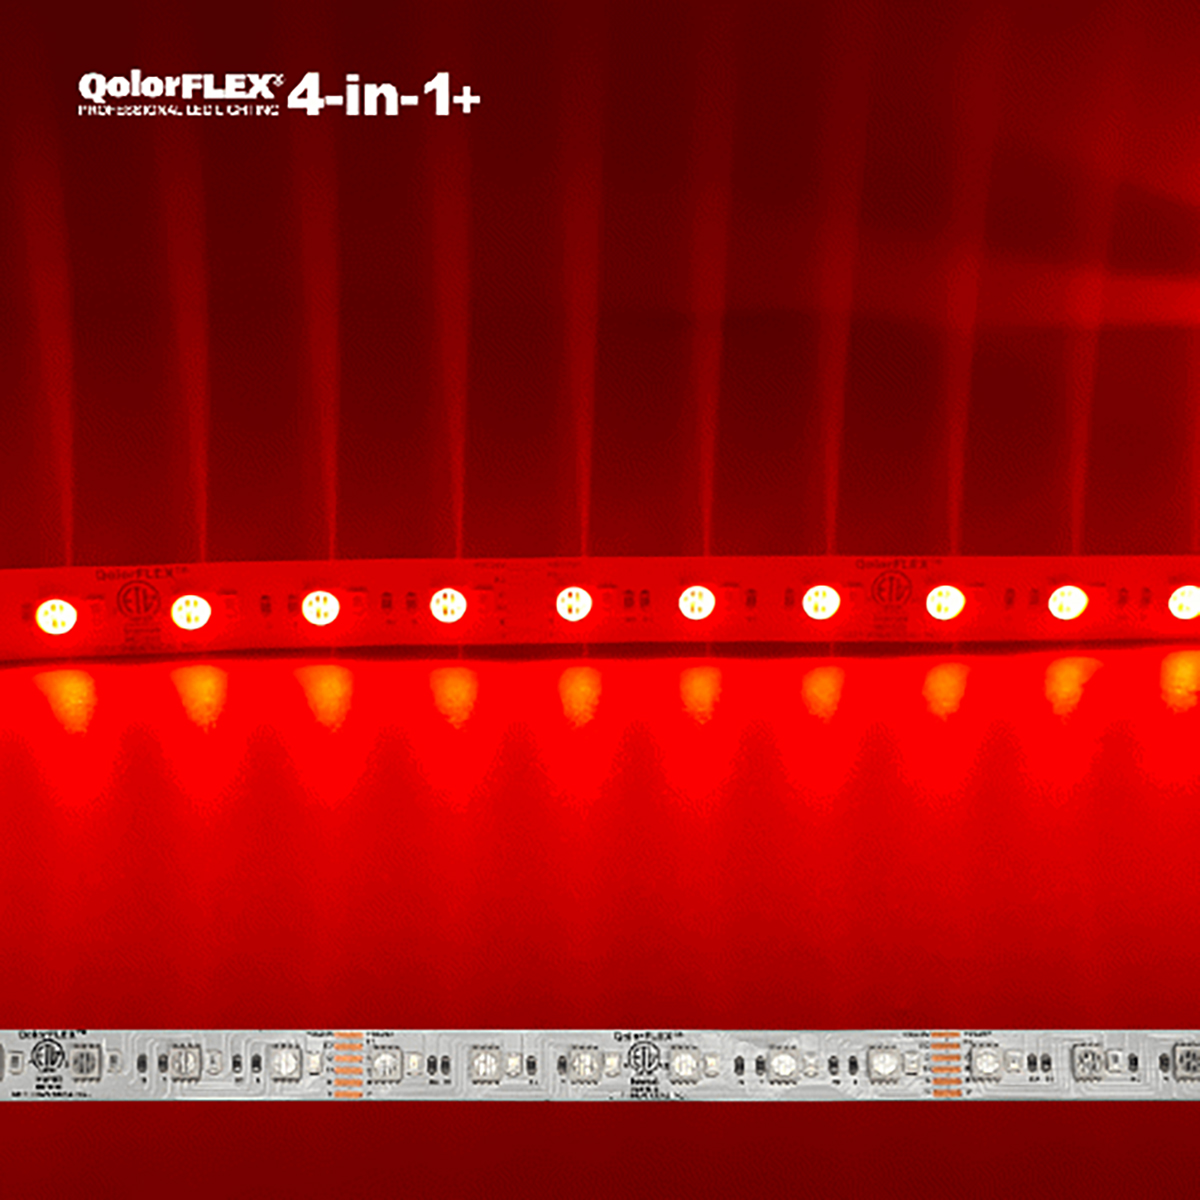 QolorFLEX Quad Chip RGBA Plus Deep Red LED Tape, deep red colorway only (still)